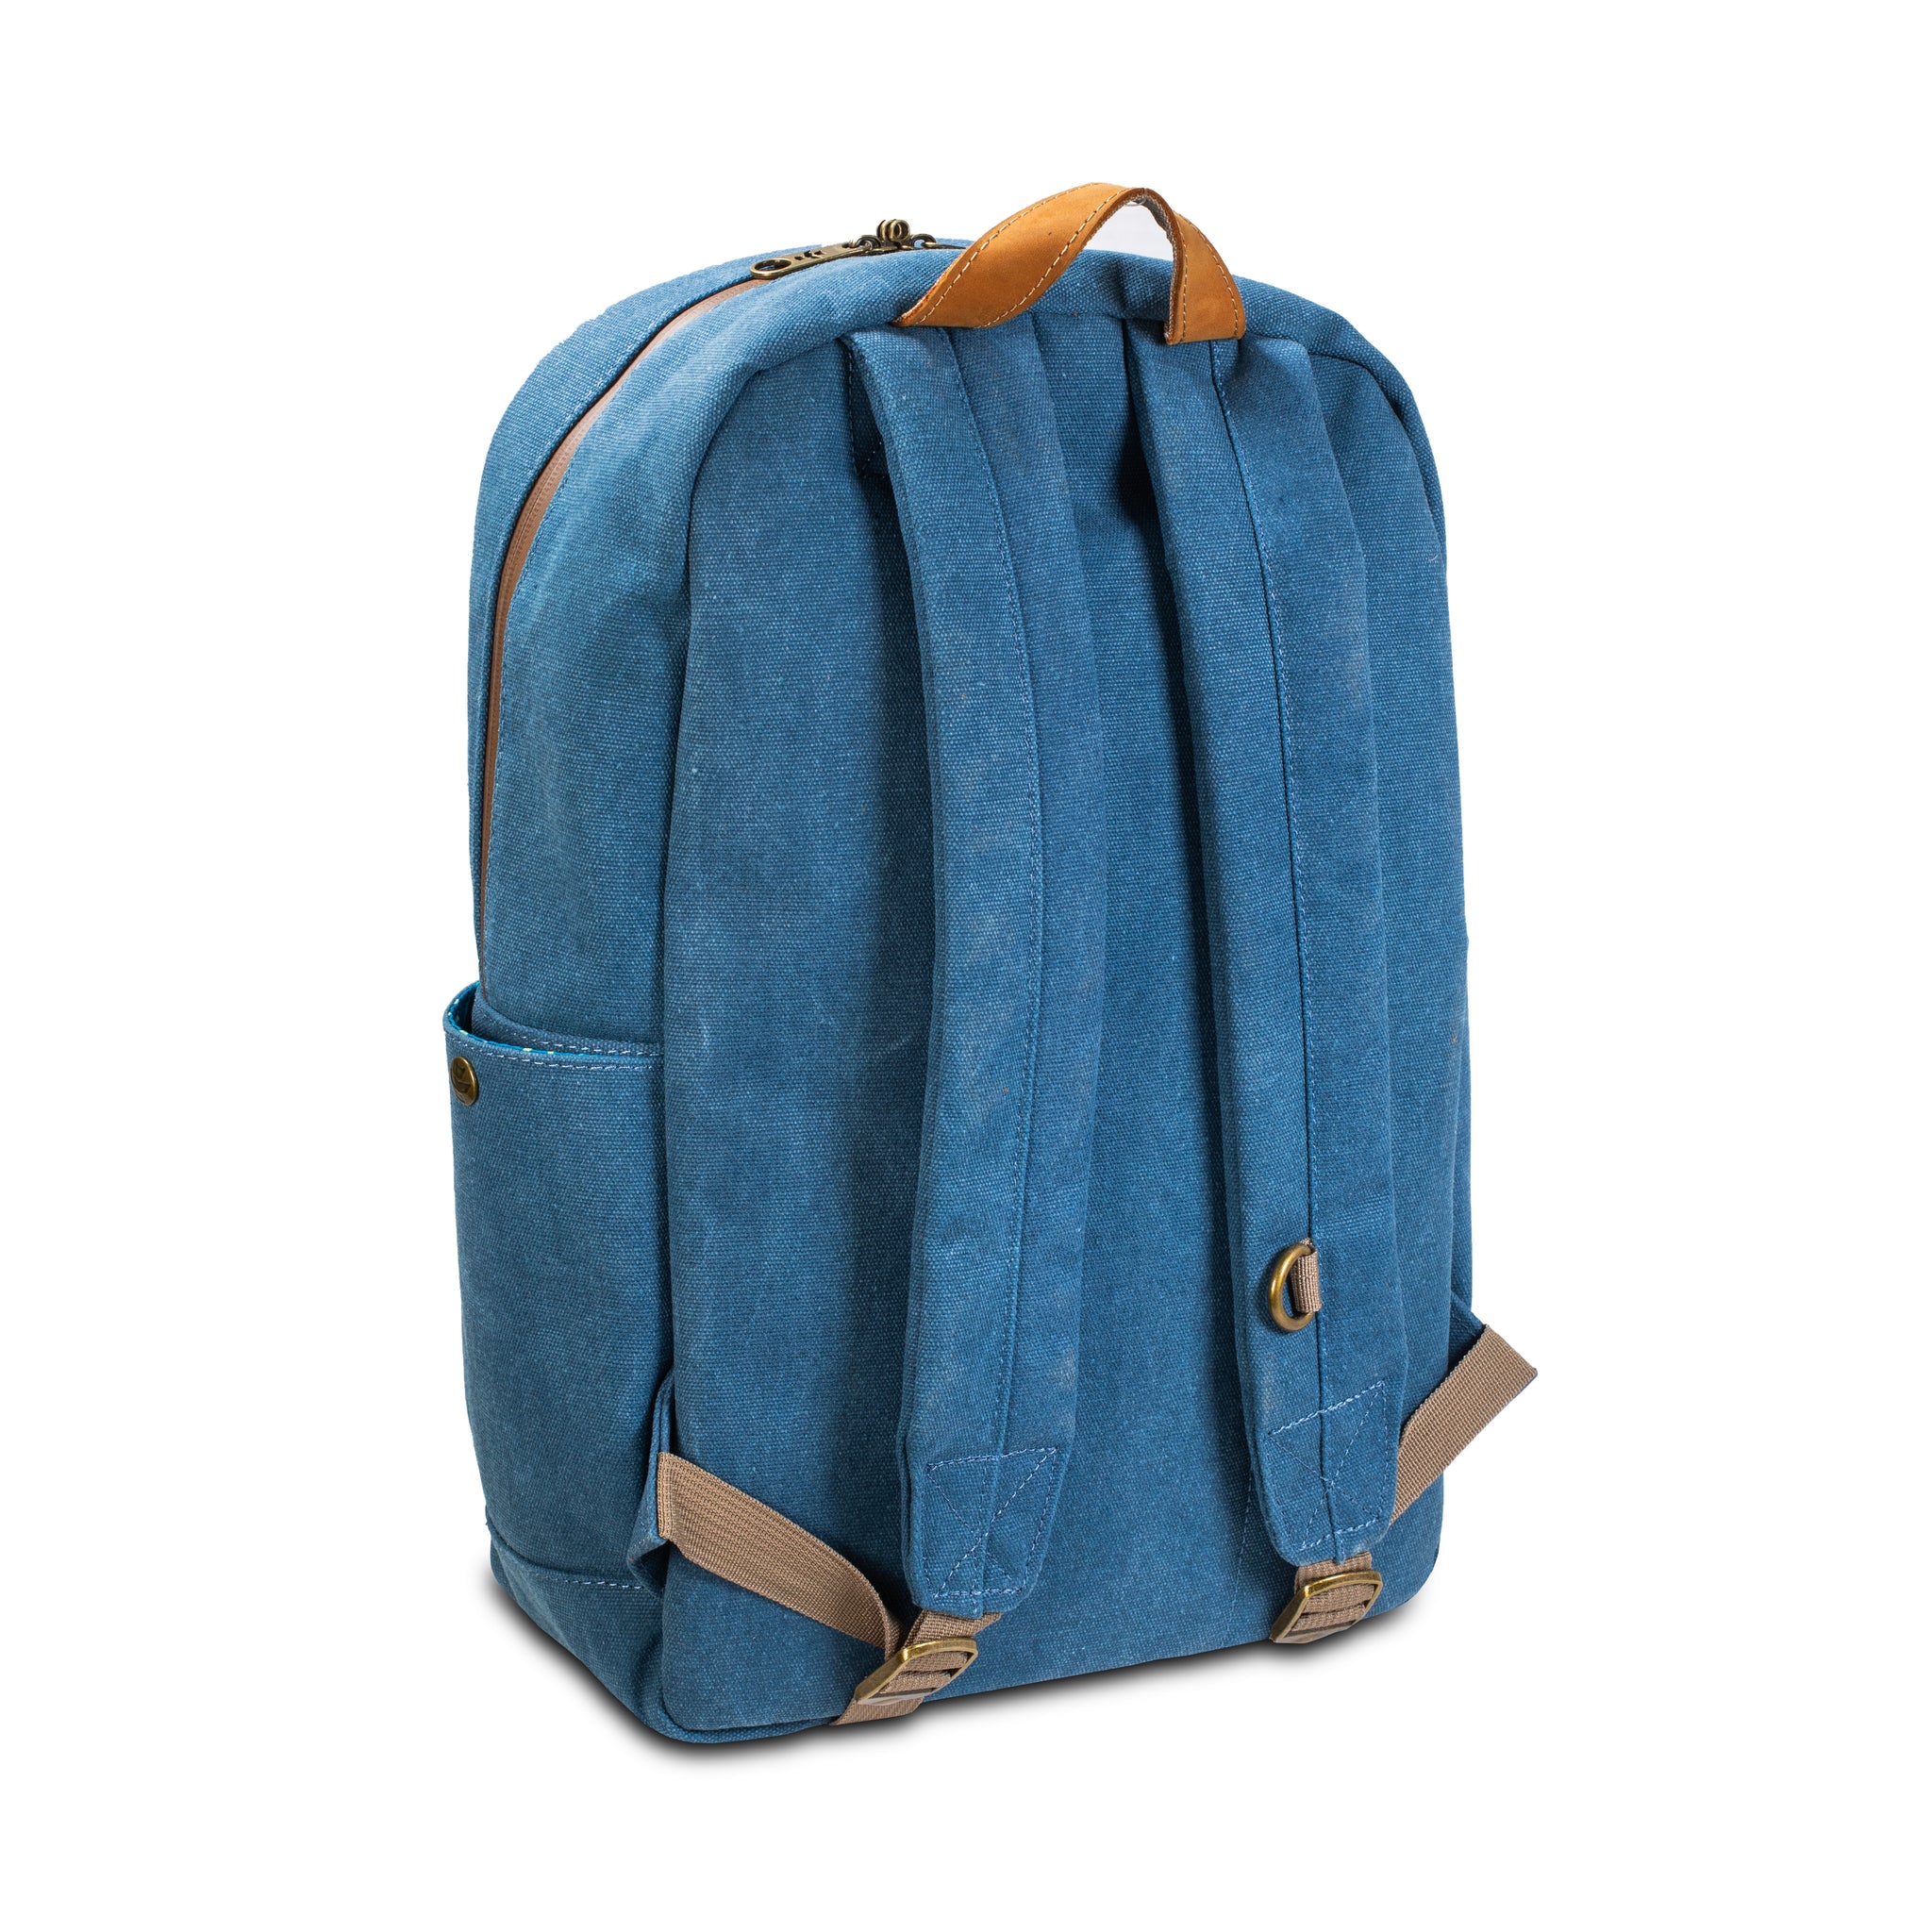 Humble Sea x Revelry - The Explorer - Smell Proof Backpack